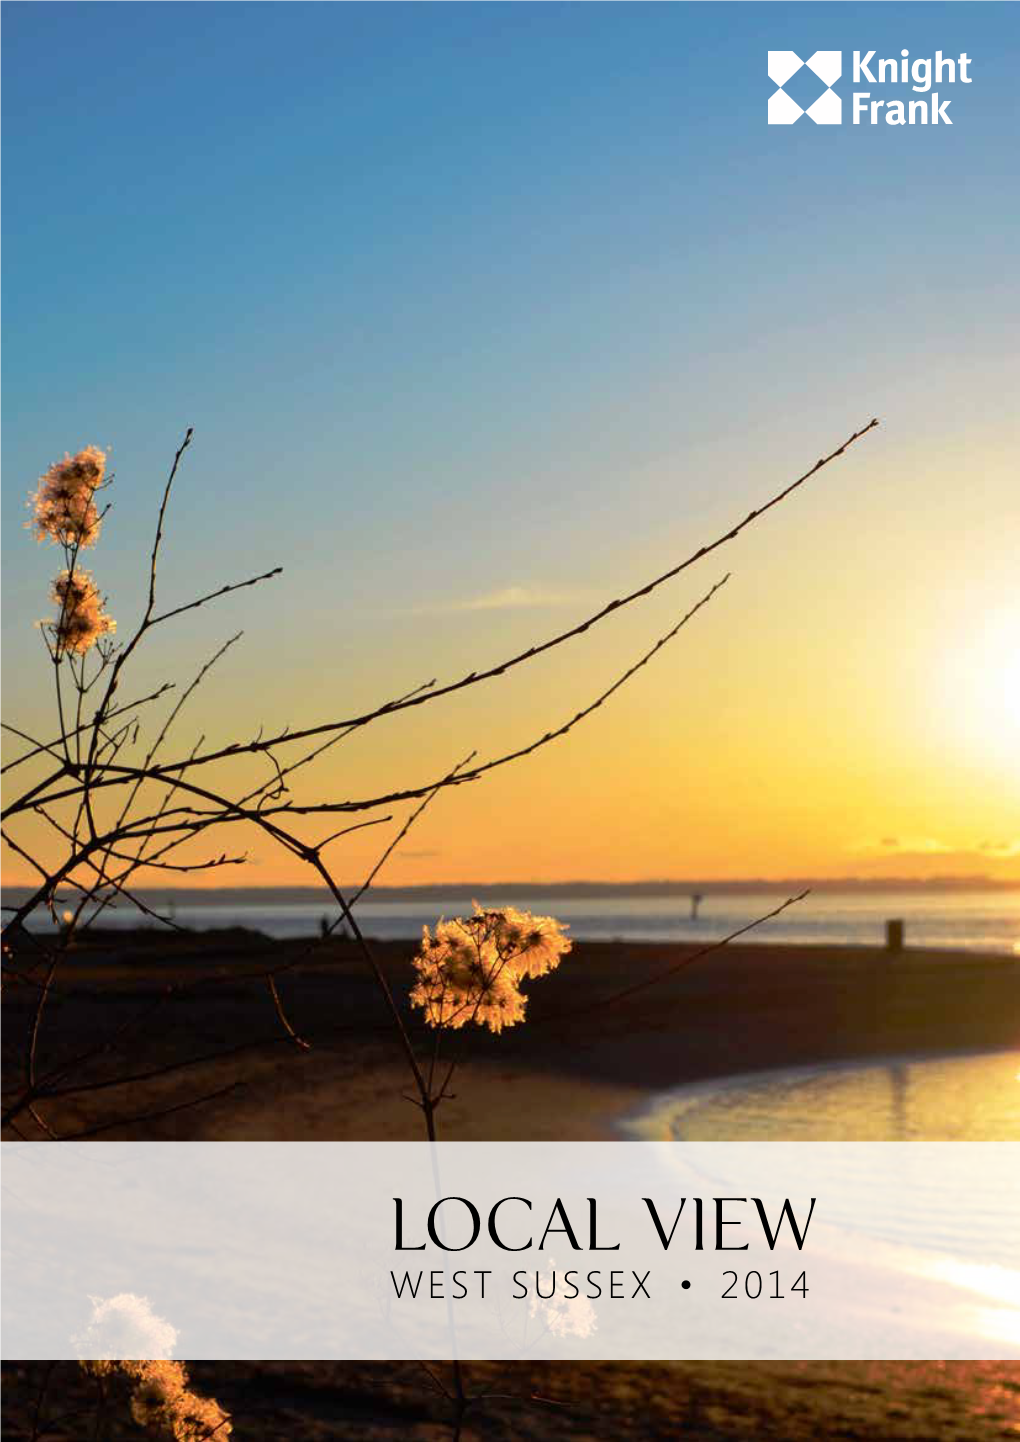 Local View WEST SUSSEX • 2014 WELCOME to LOCAL VIEW